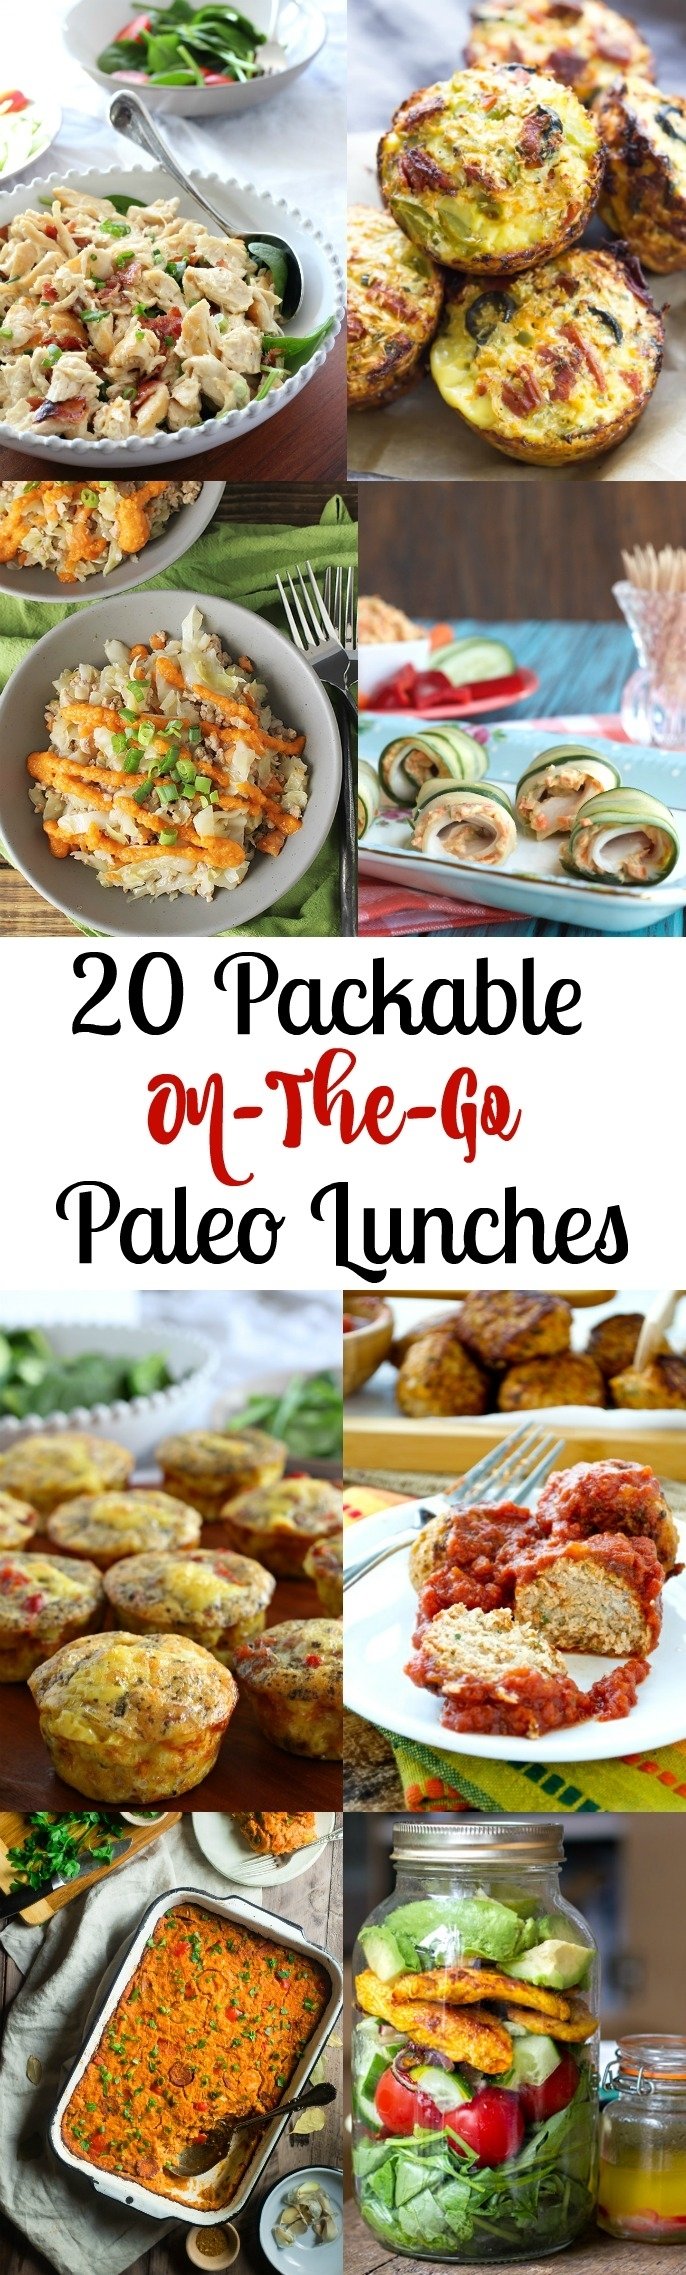 10 Perfect Paleo Lunch Ideas On The Go 20 packable on the go paleo lunches the paleo running momma 2 2022